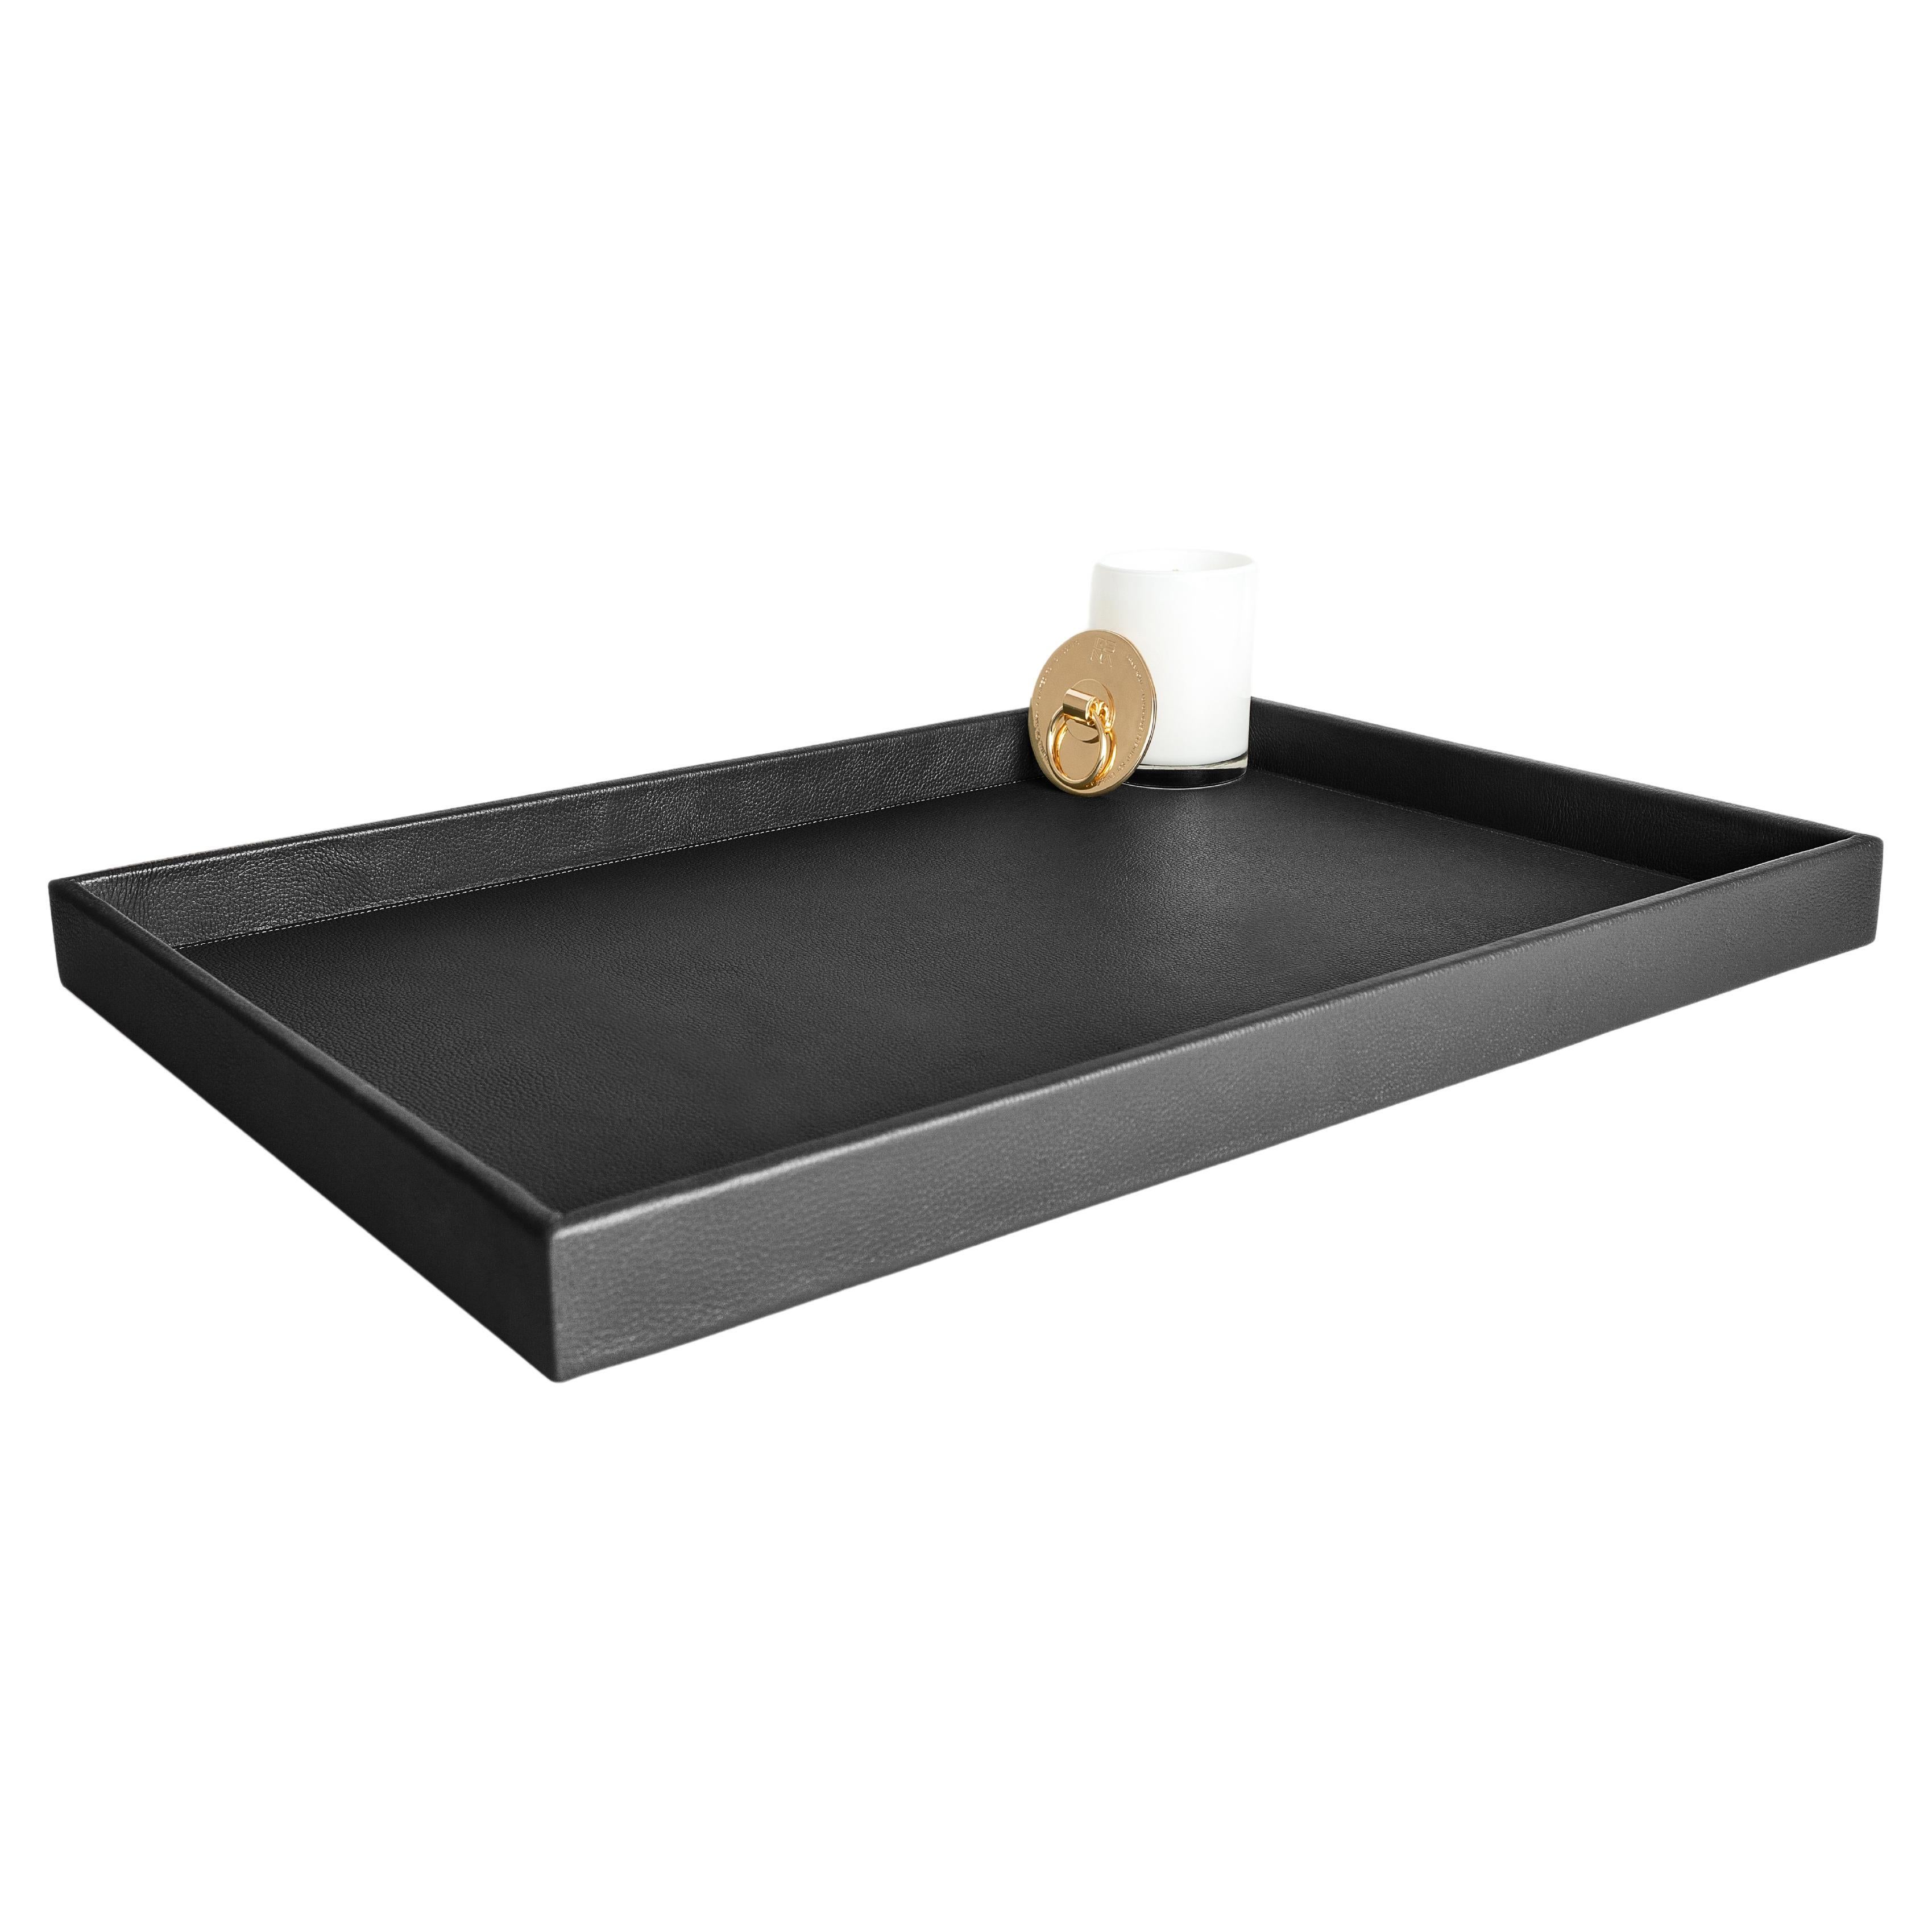 Leather Tray, Large B Retangular Tray, Handmade in Brazil - Color: Black For Sale